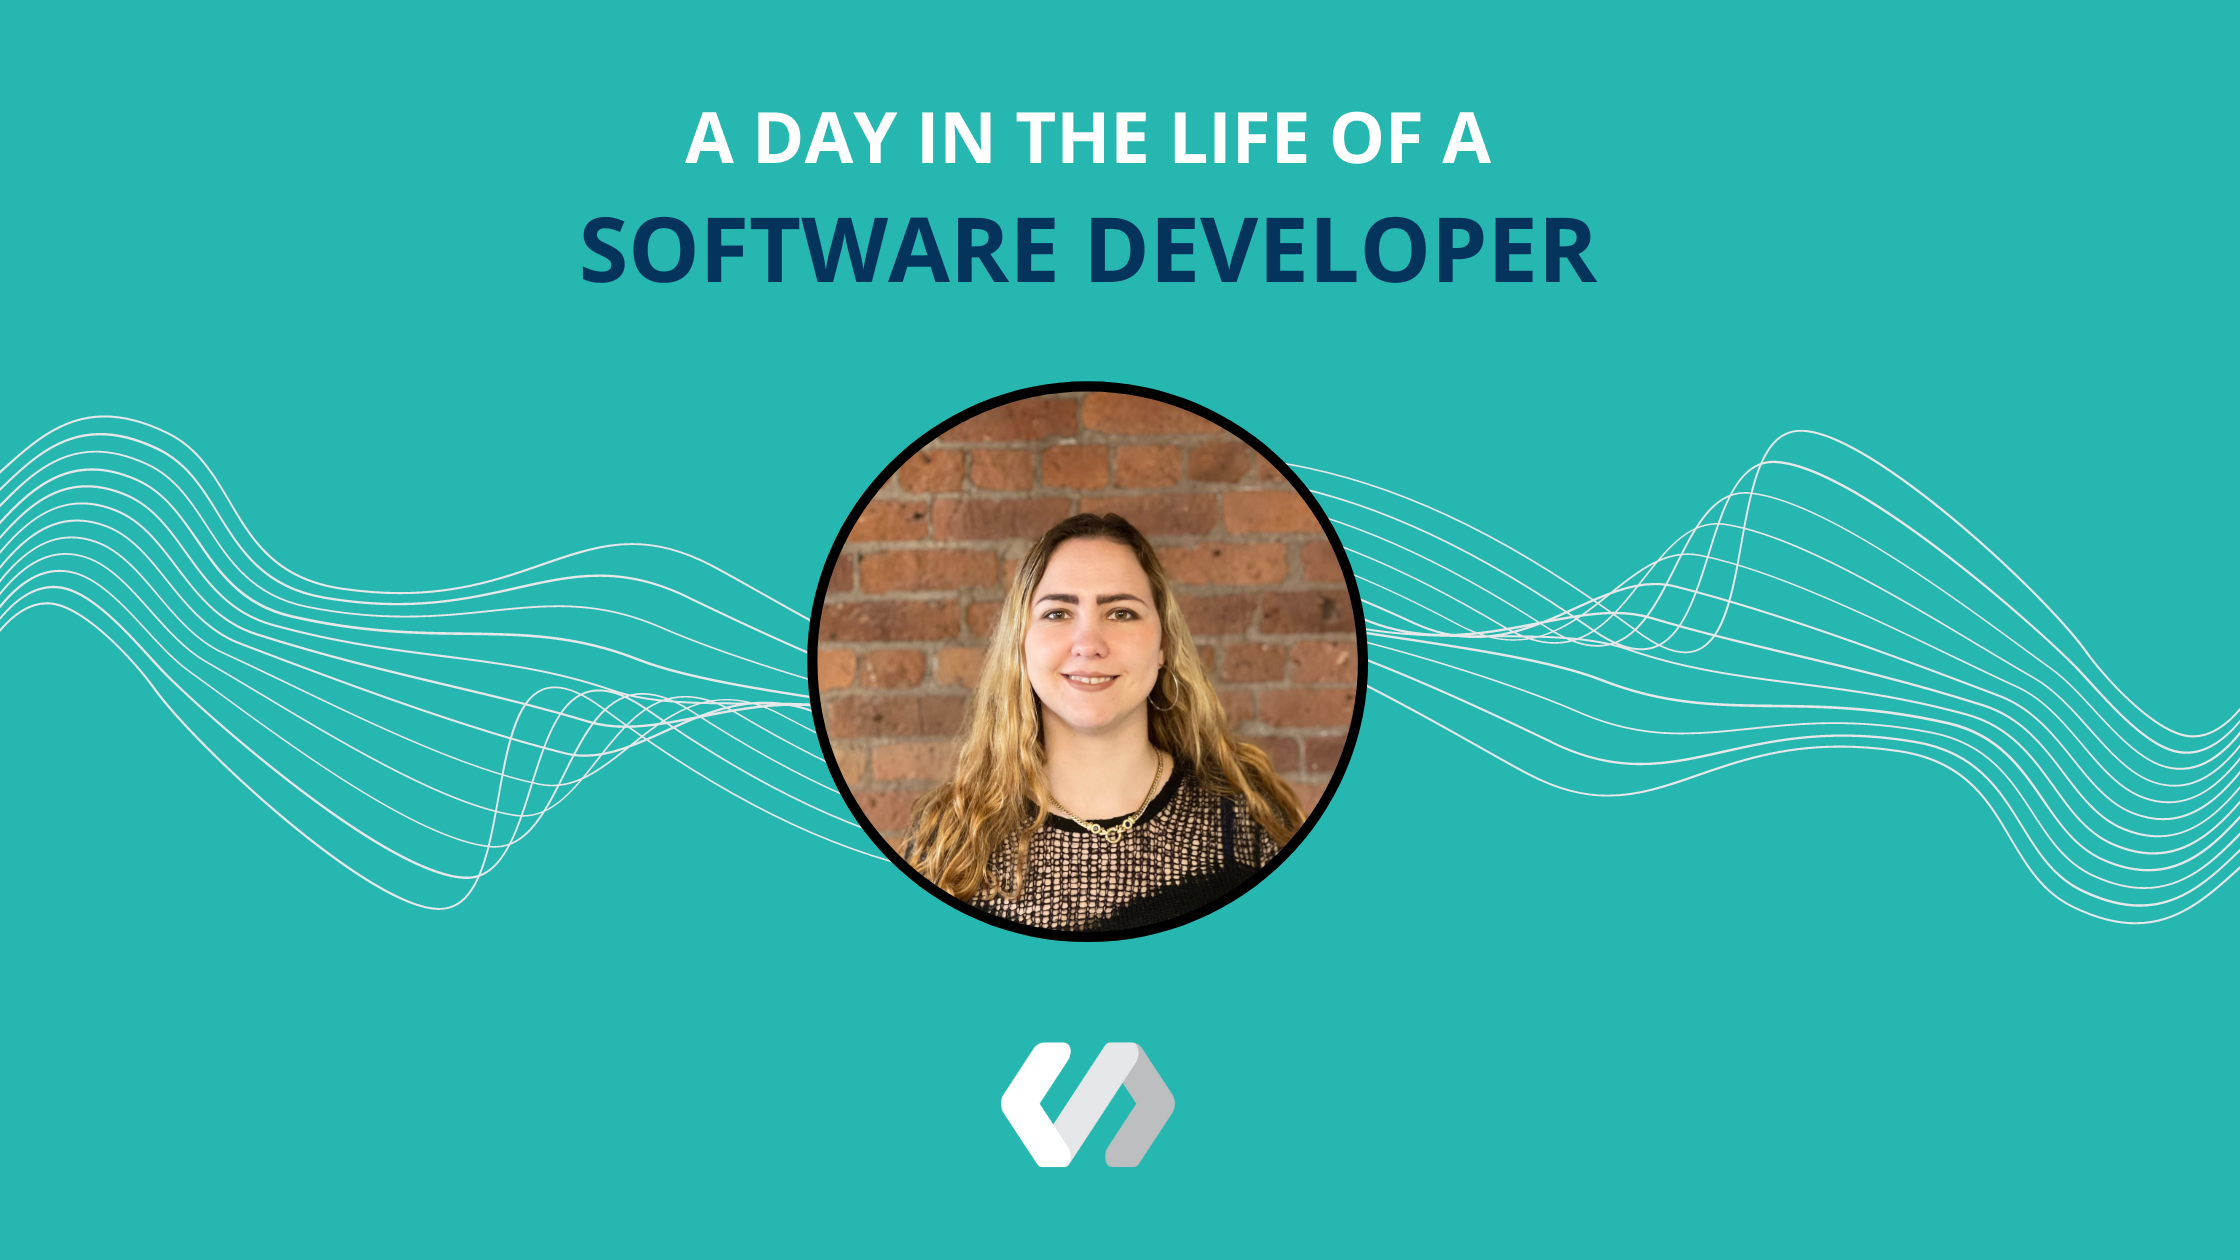 A Day In The Life of a Software Developer - Viktoriia